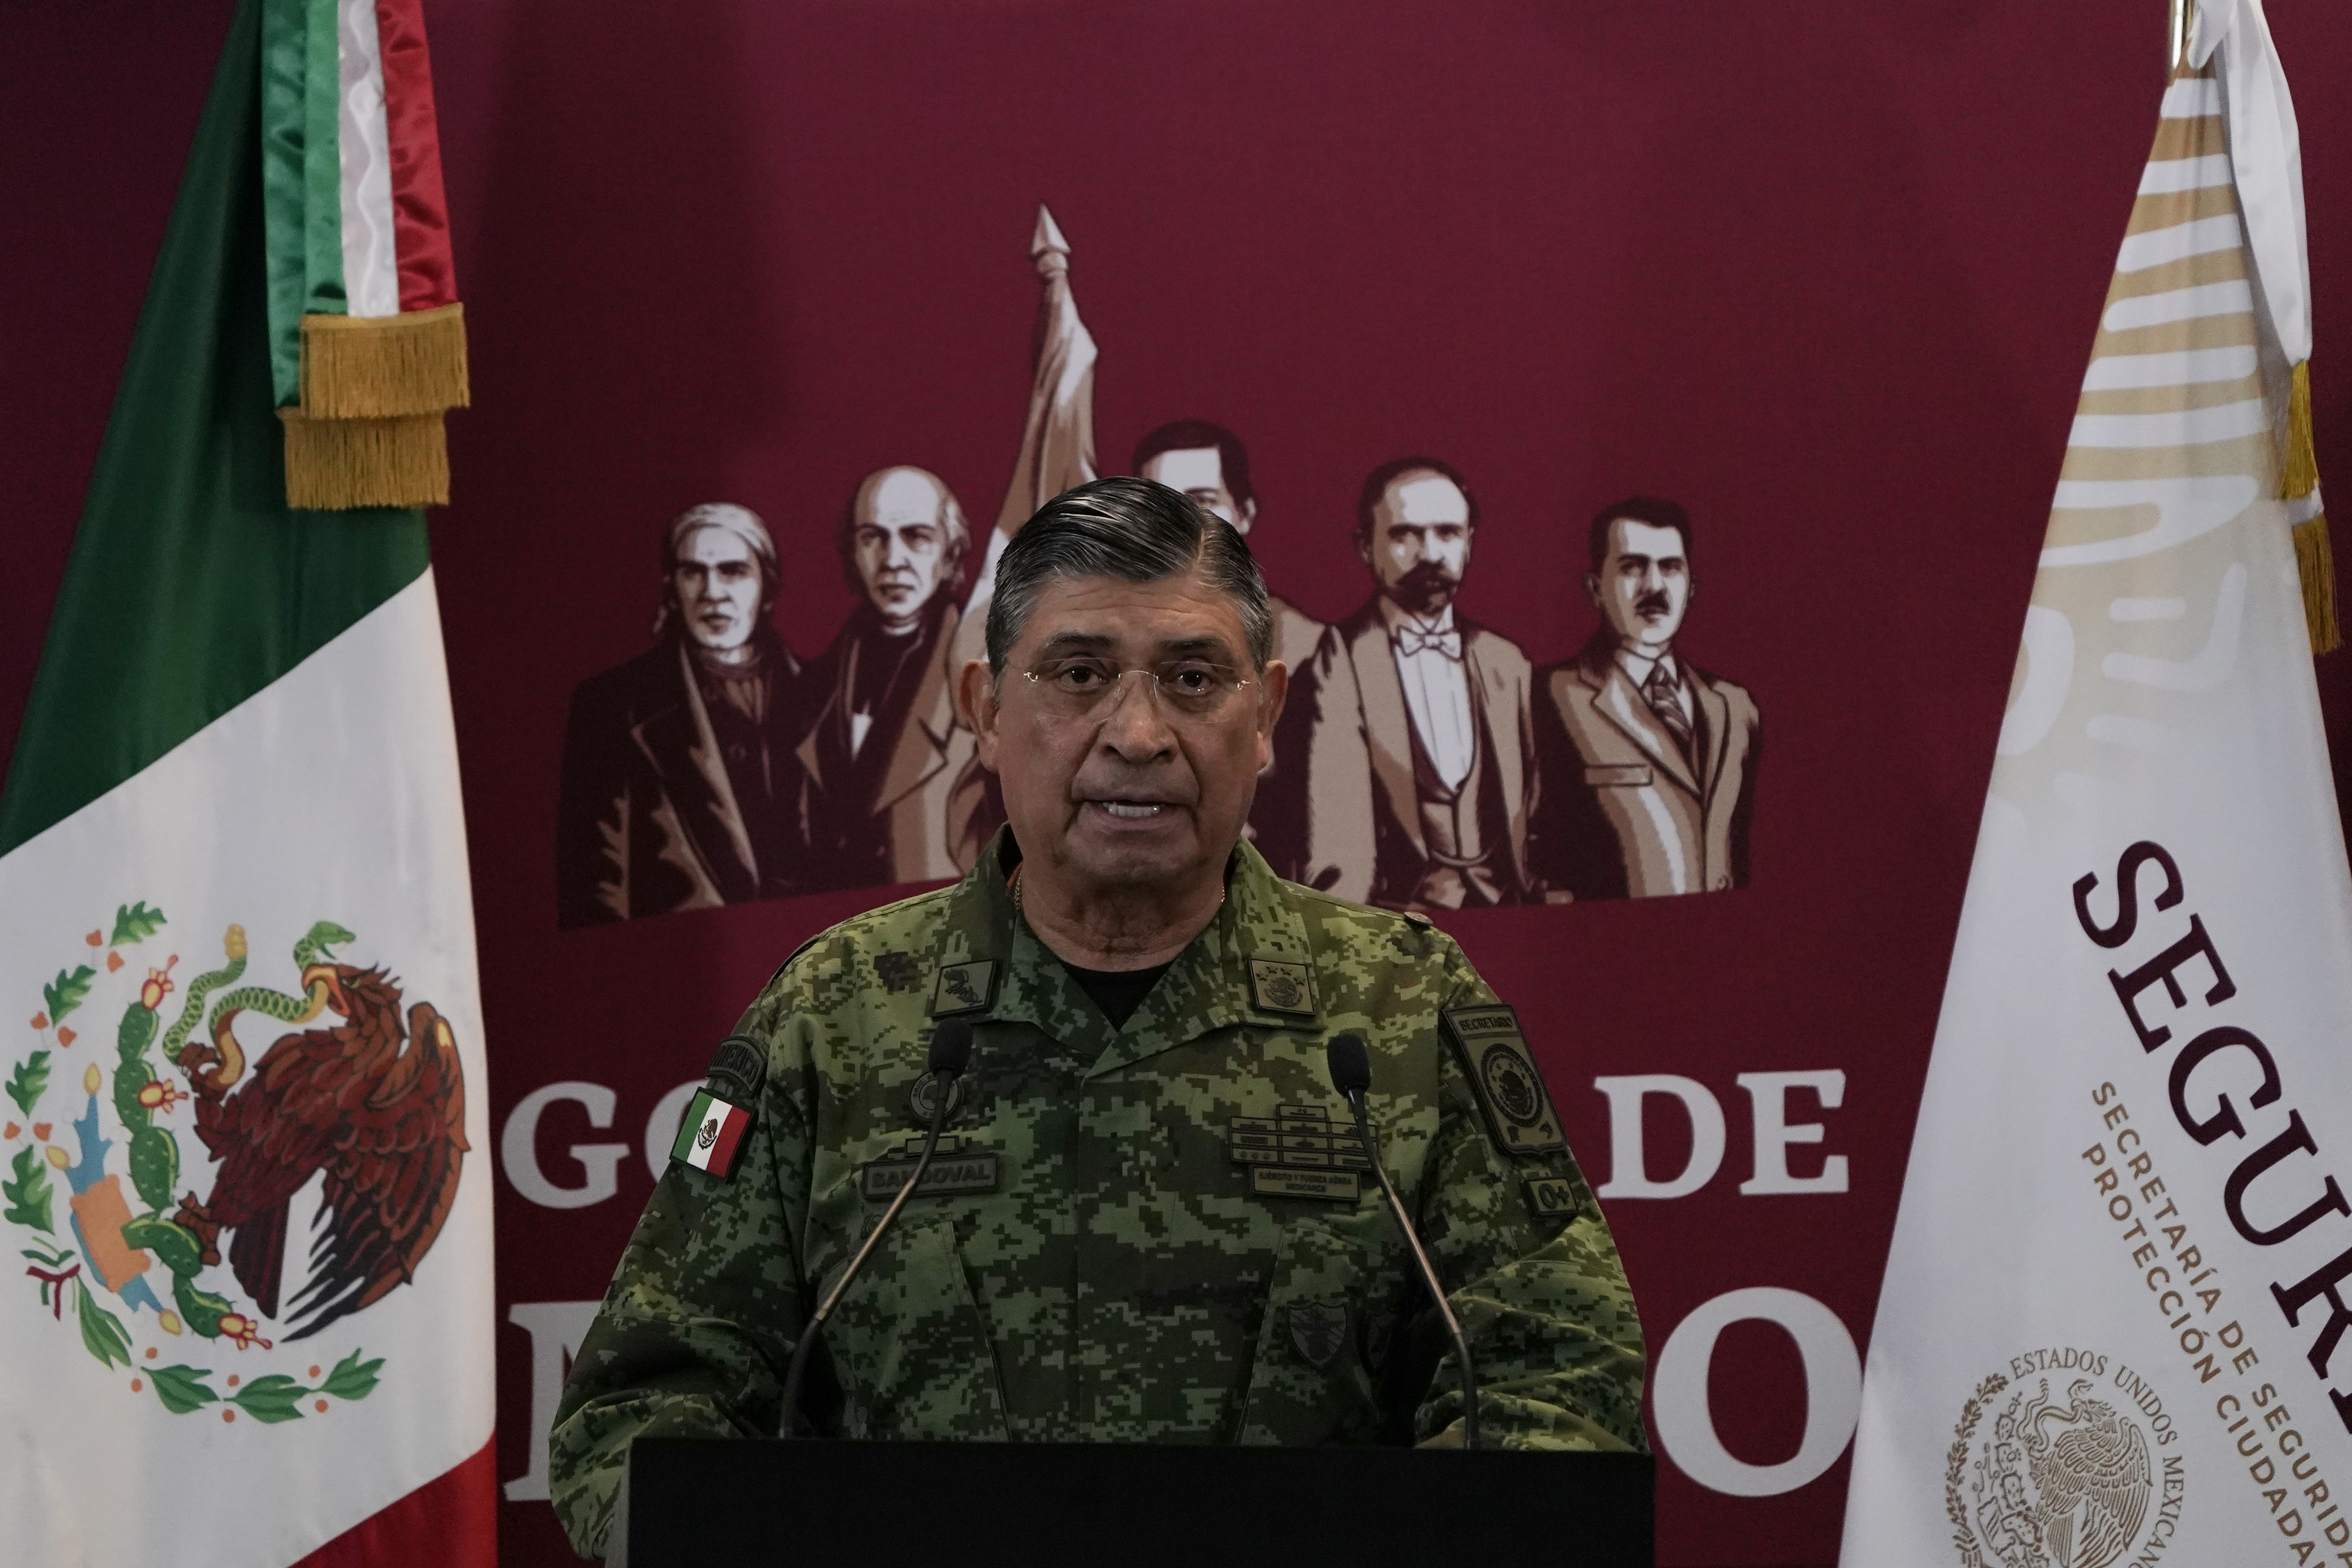 Mexico's Secretary of Defense Luis Cresencio Sandoval announces the arrest of Ovidio Guzmán during a press conference on Thursday, January 5, 2023, in Mexico City.  Mexican security forces captured Ovidio Guzmán, an alleged drug trafficker wanted by the United States and one of the sons of former Sinaloa Cartel boss Joaquín "El Chapo" Guzmán, on Thursday in a pre-dawn operation that sparked gunfire and roadblocks in the city of Culiacán.  (AP Photo/Eduardo Verdugo)